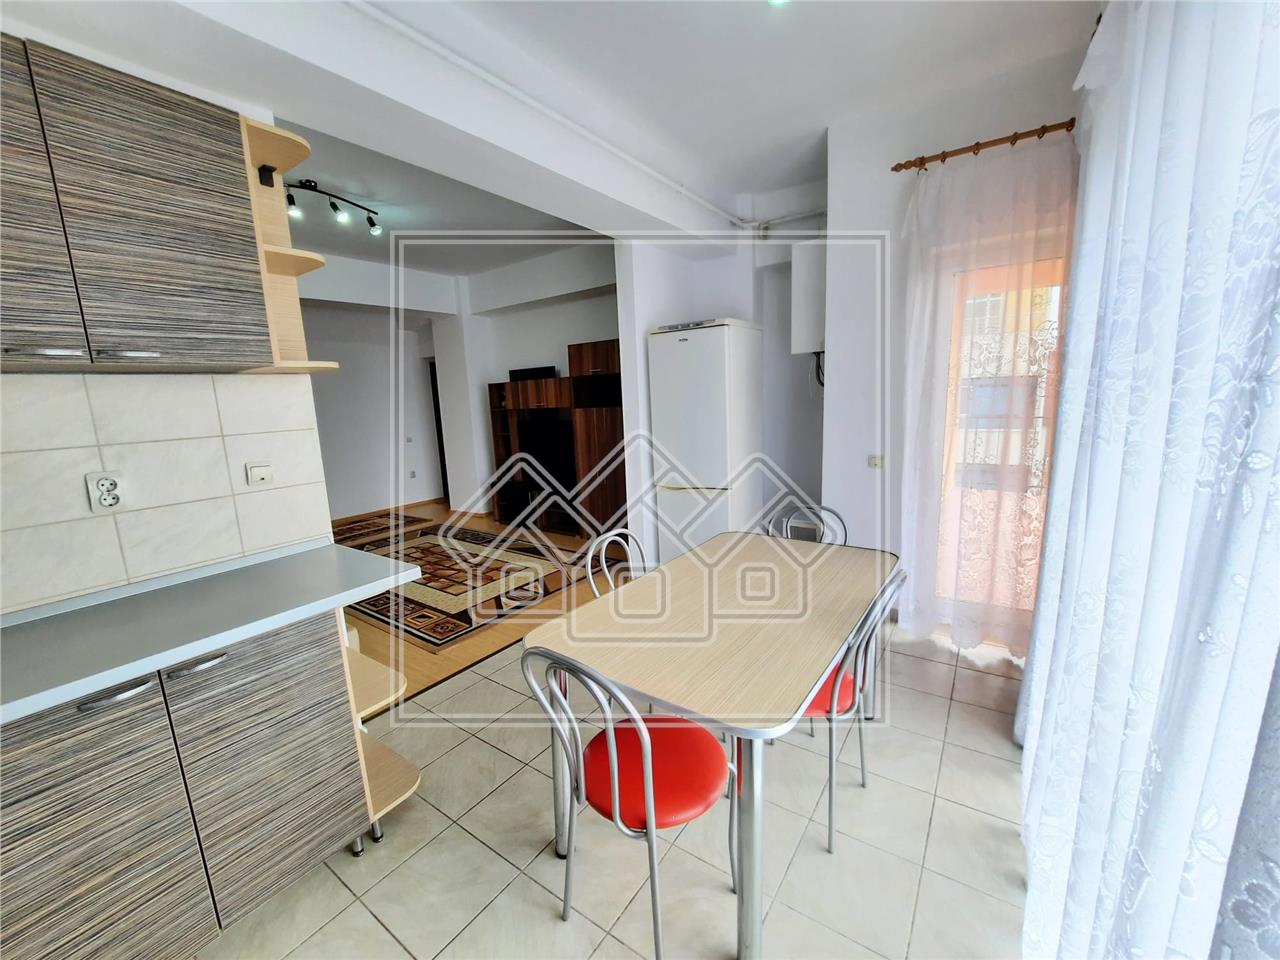 Apartment for rent in Sibiu - 3 rooms and balcony - Strand II area